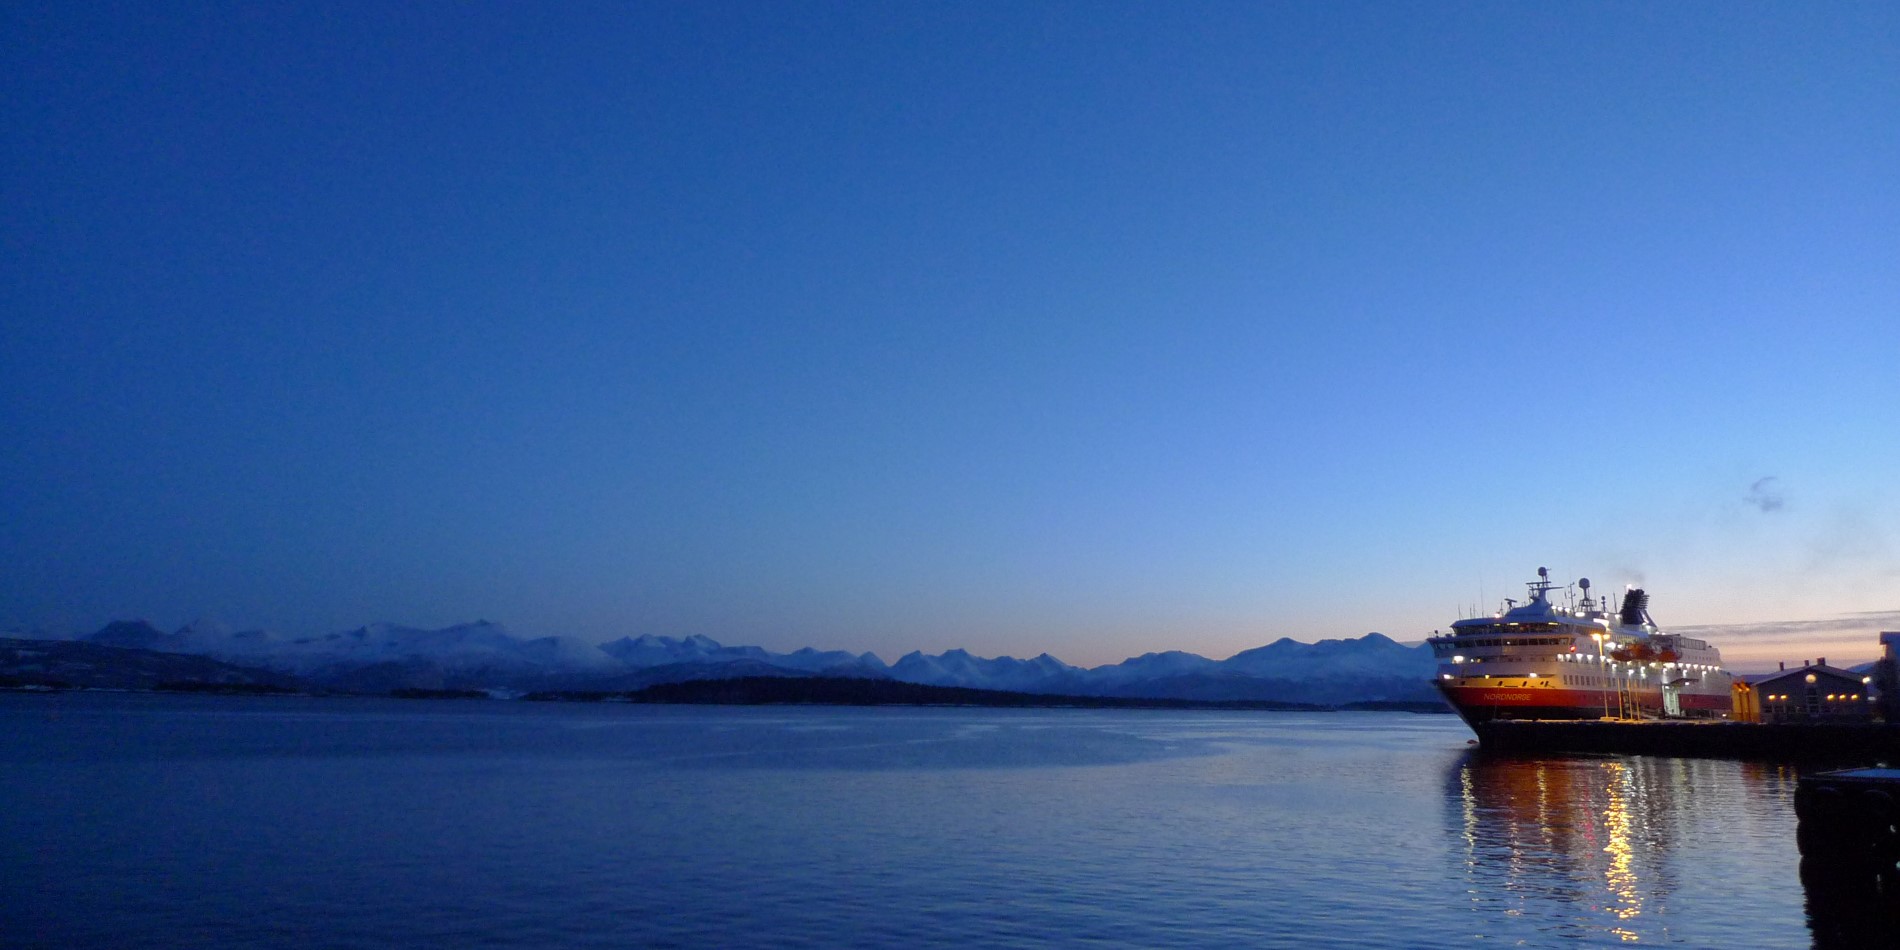 MS Nordnorge has arrived in Molde on a beautiful winter evening